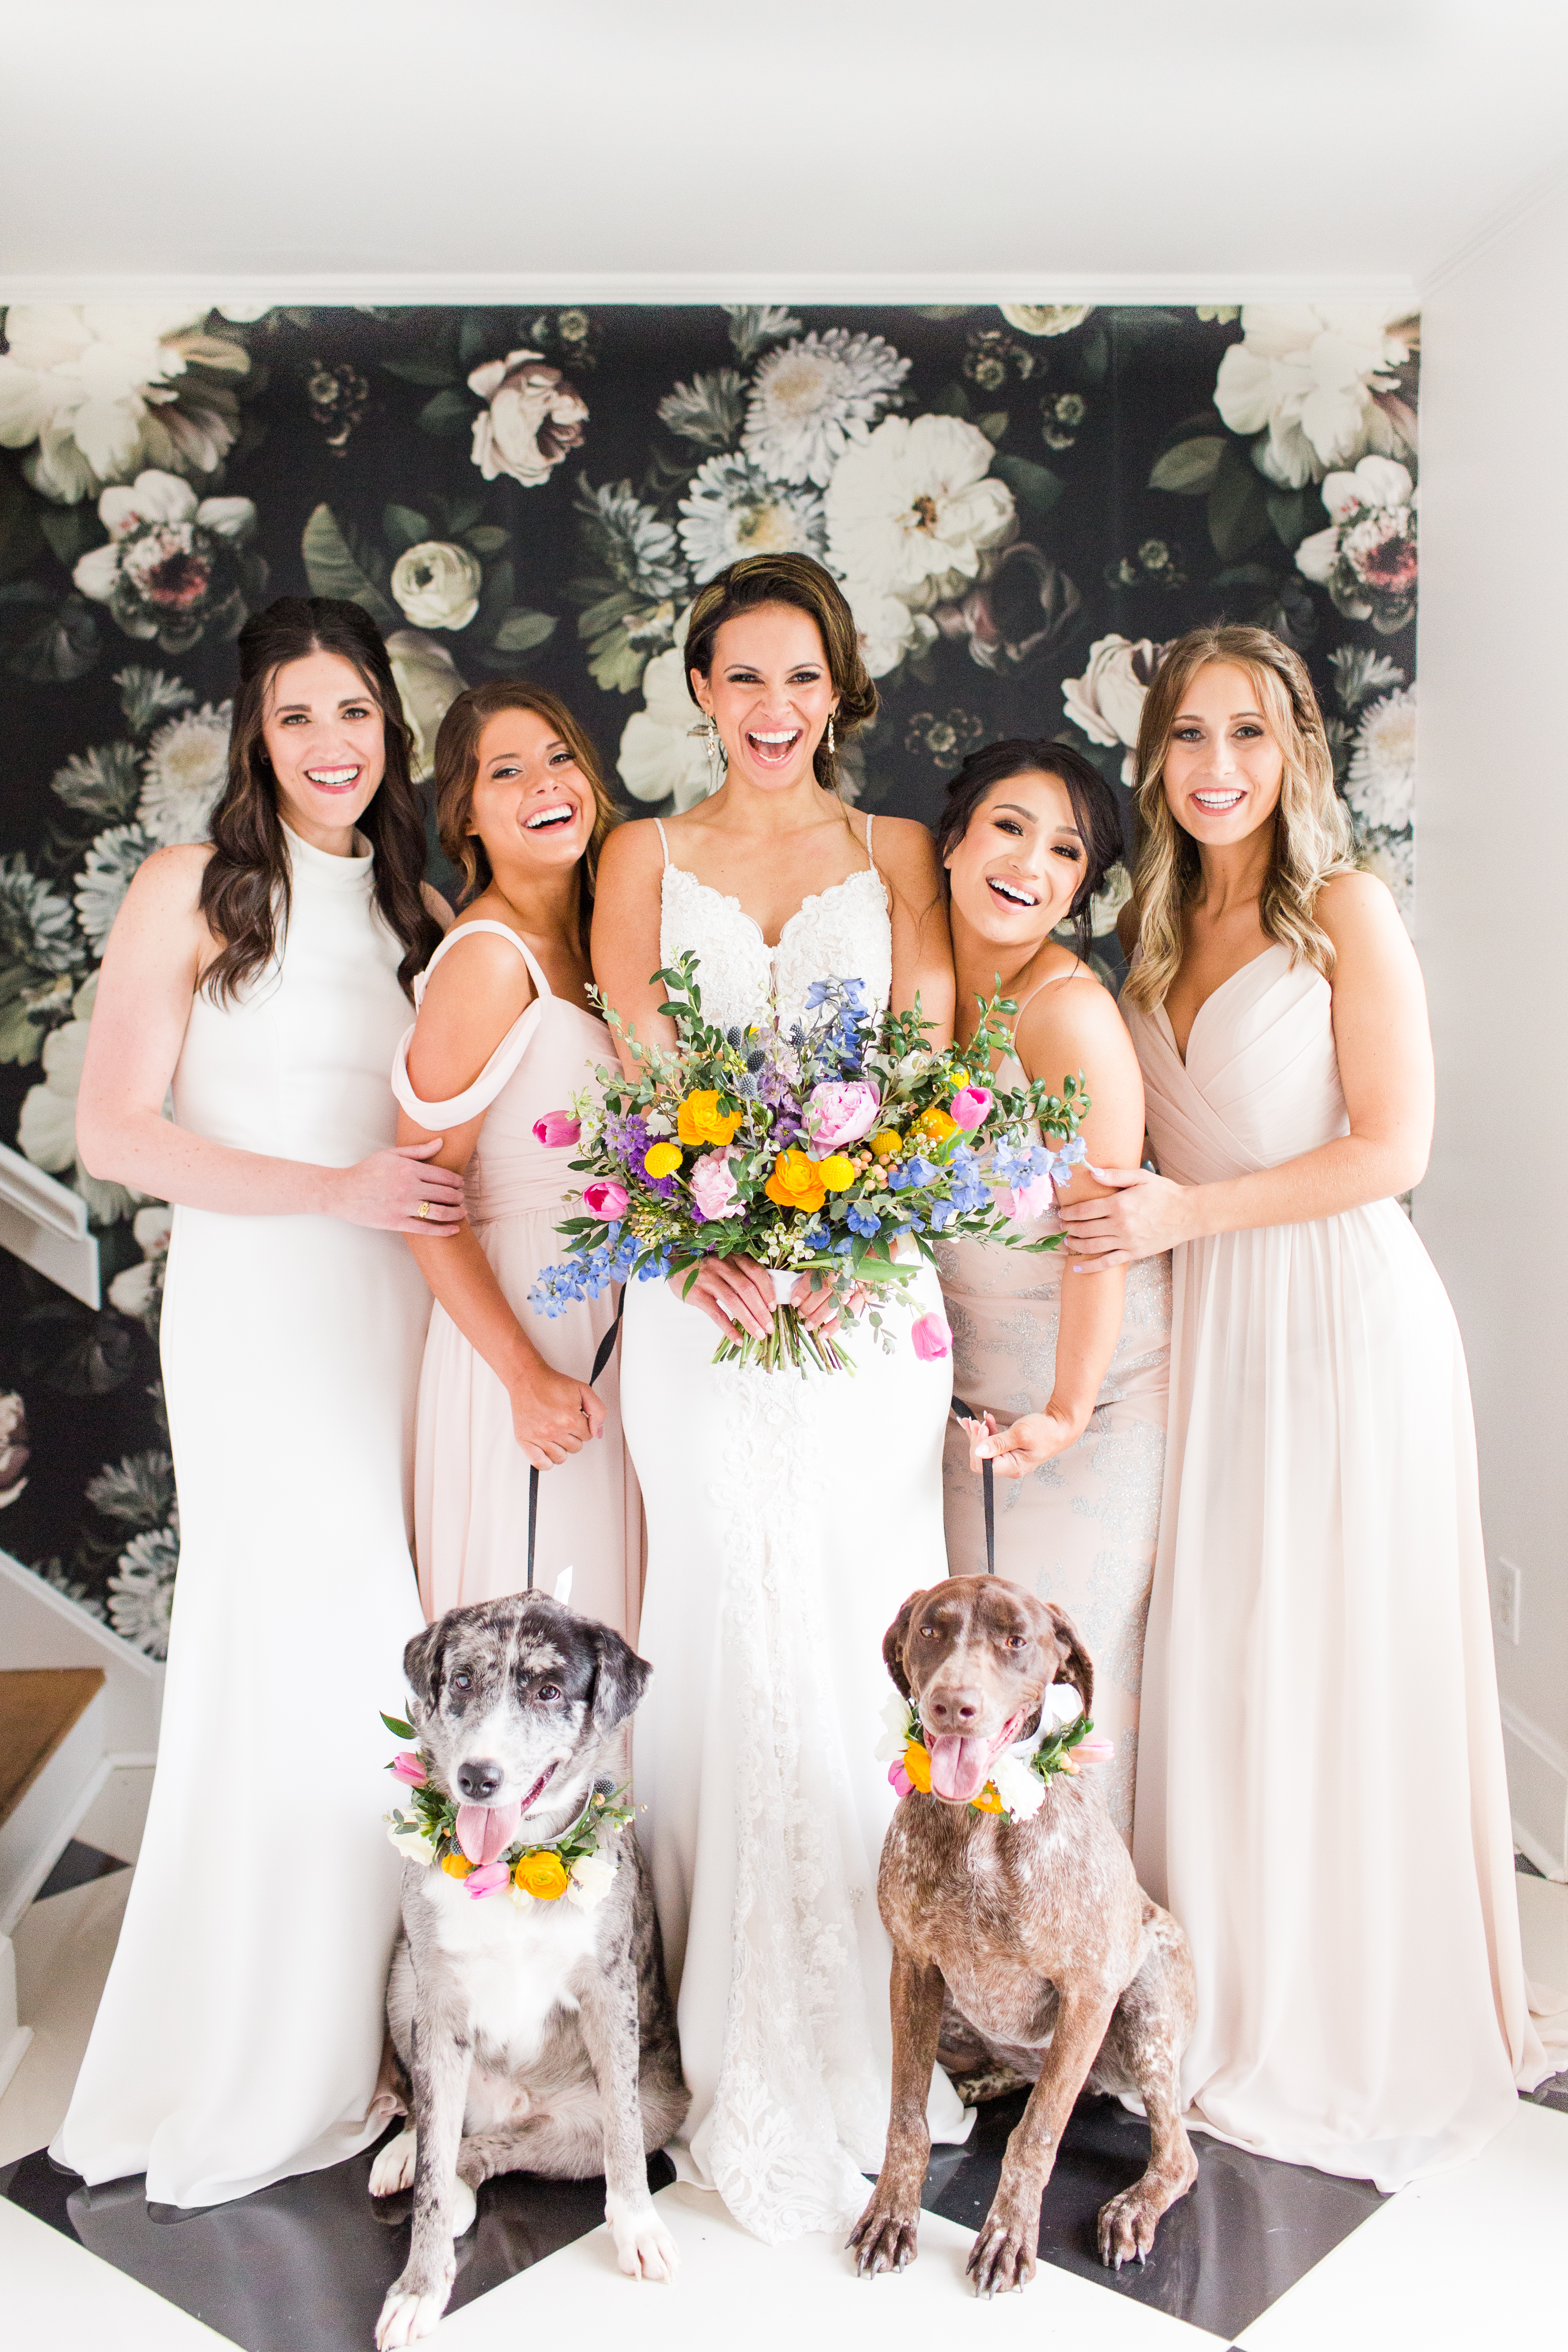 Puppy Love Photo Shoot at House of White Bridal with dogs from Warrick Humane Society and flowers by Emerald Design